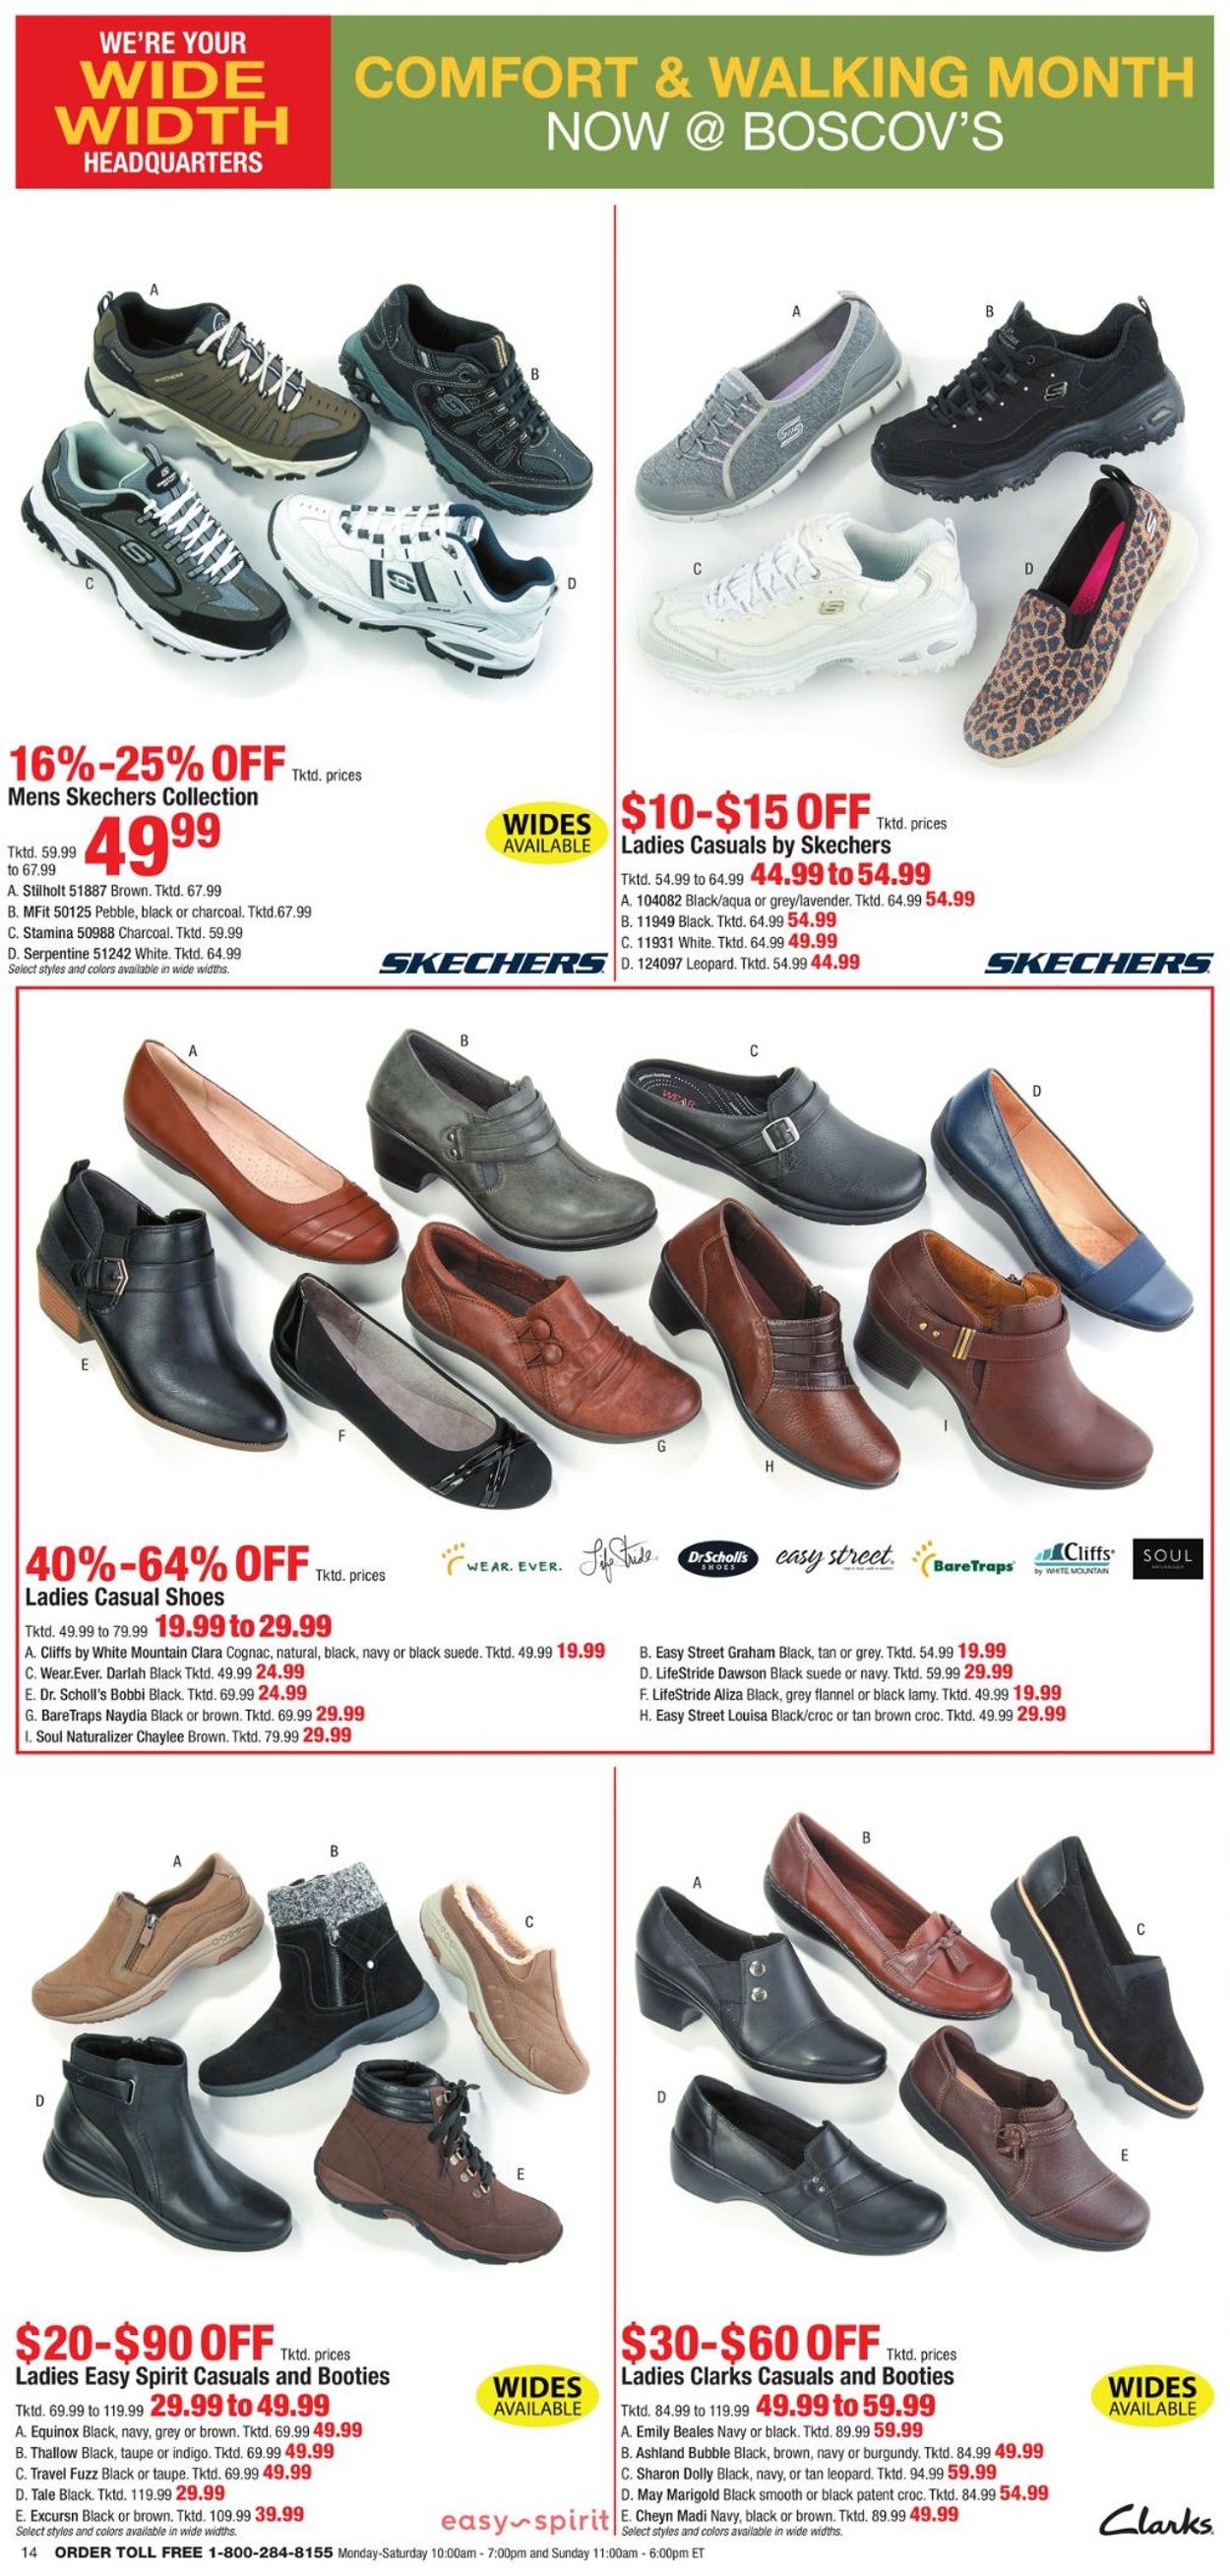 Boscov's Current weekly ad 10/25 - 10 